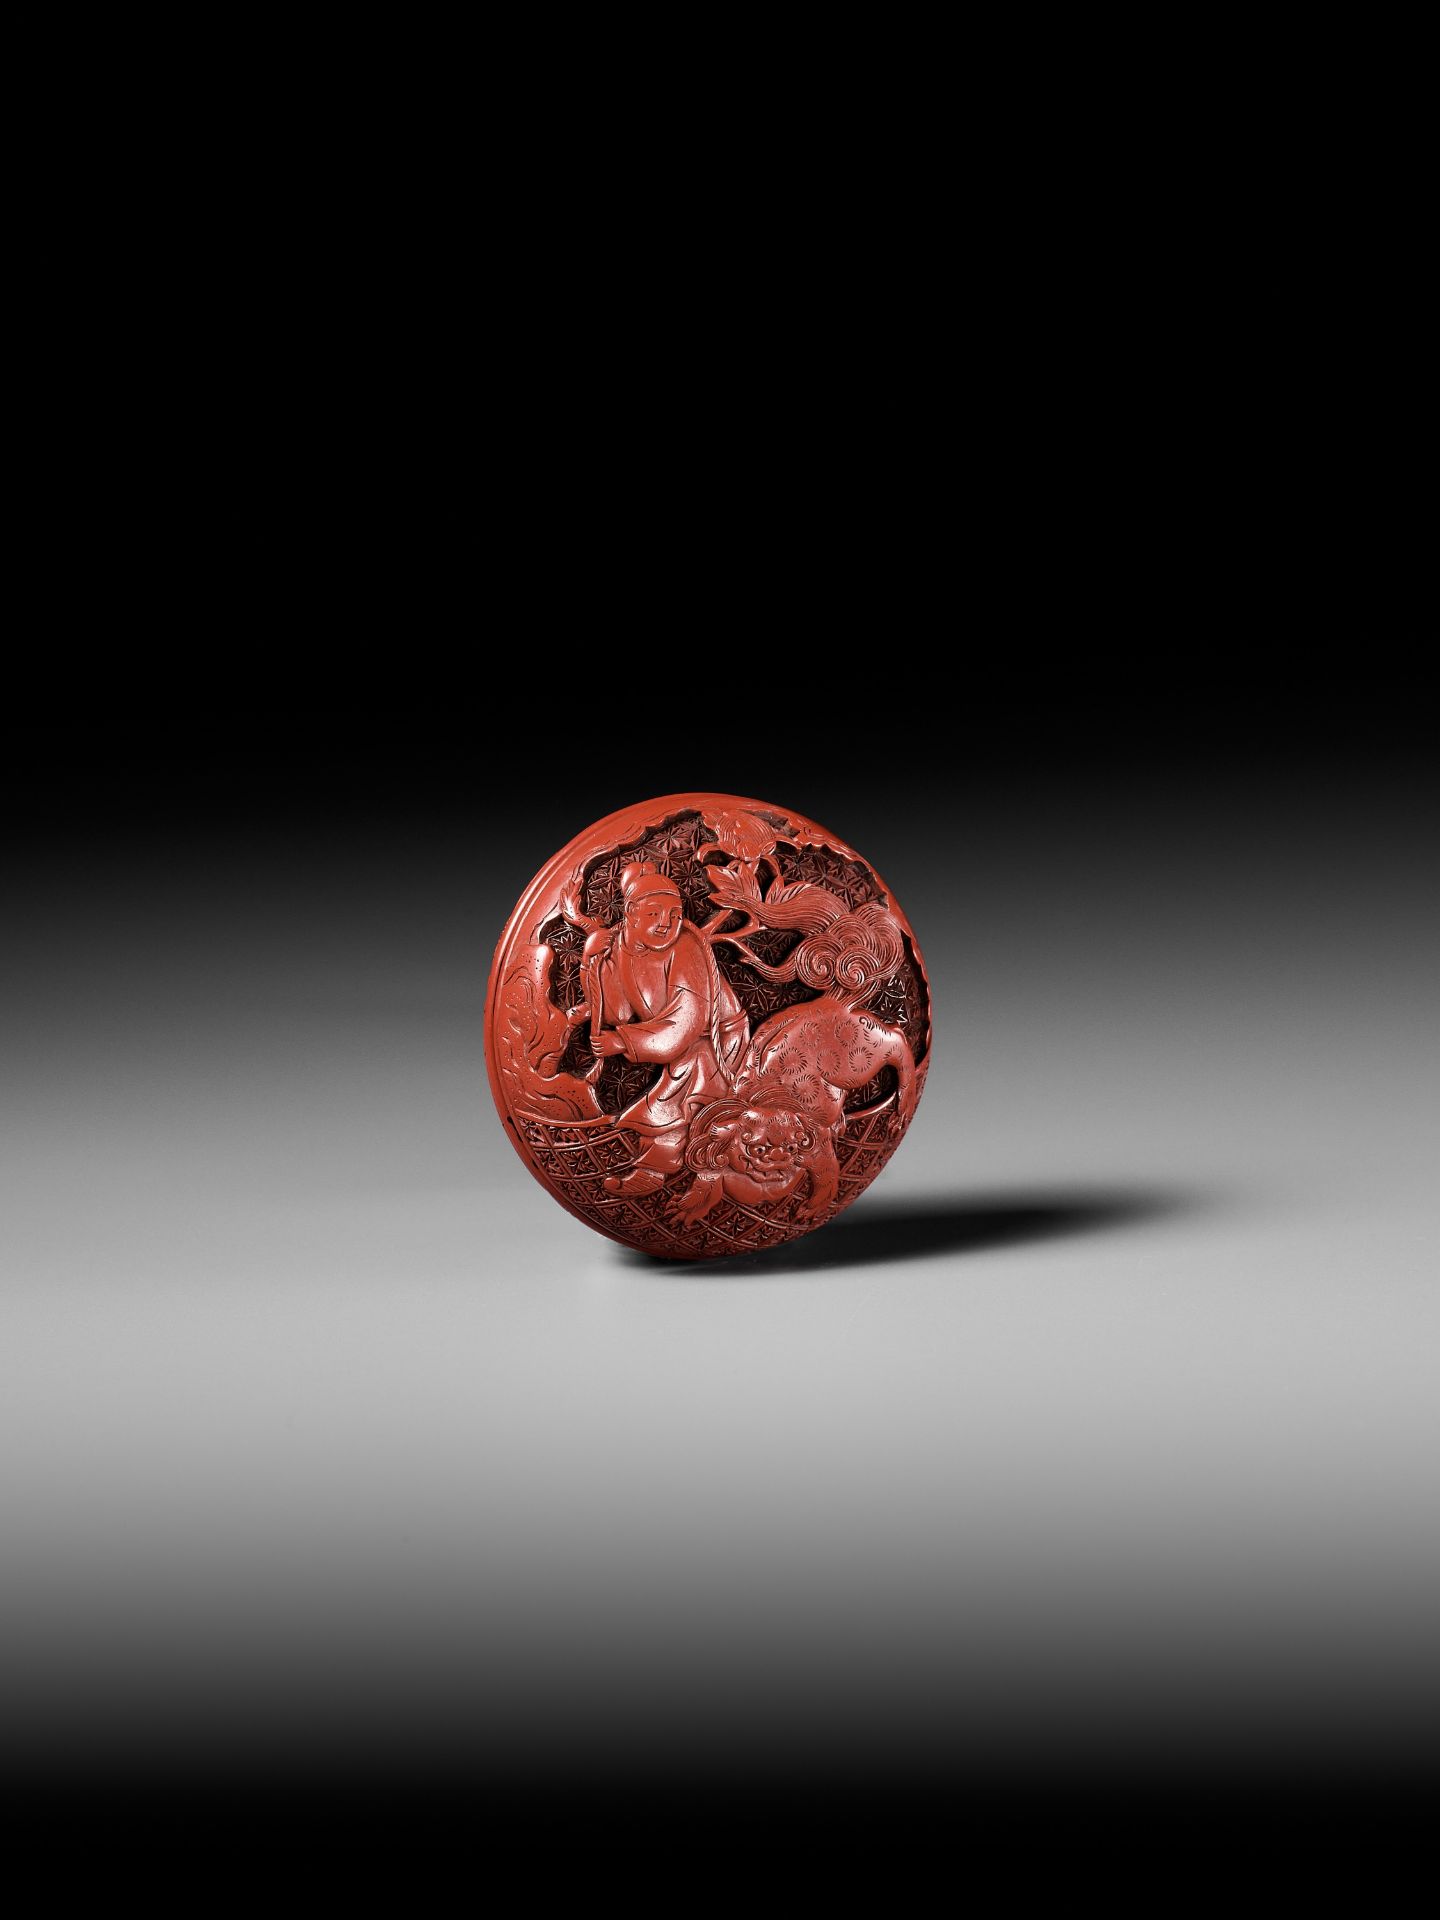 A FINE TSUISHU (CARVED RED LACQUER) MANJU NETSUKE WITH CHINESE LITERATI AND SHISHI - Image 5 of 9